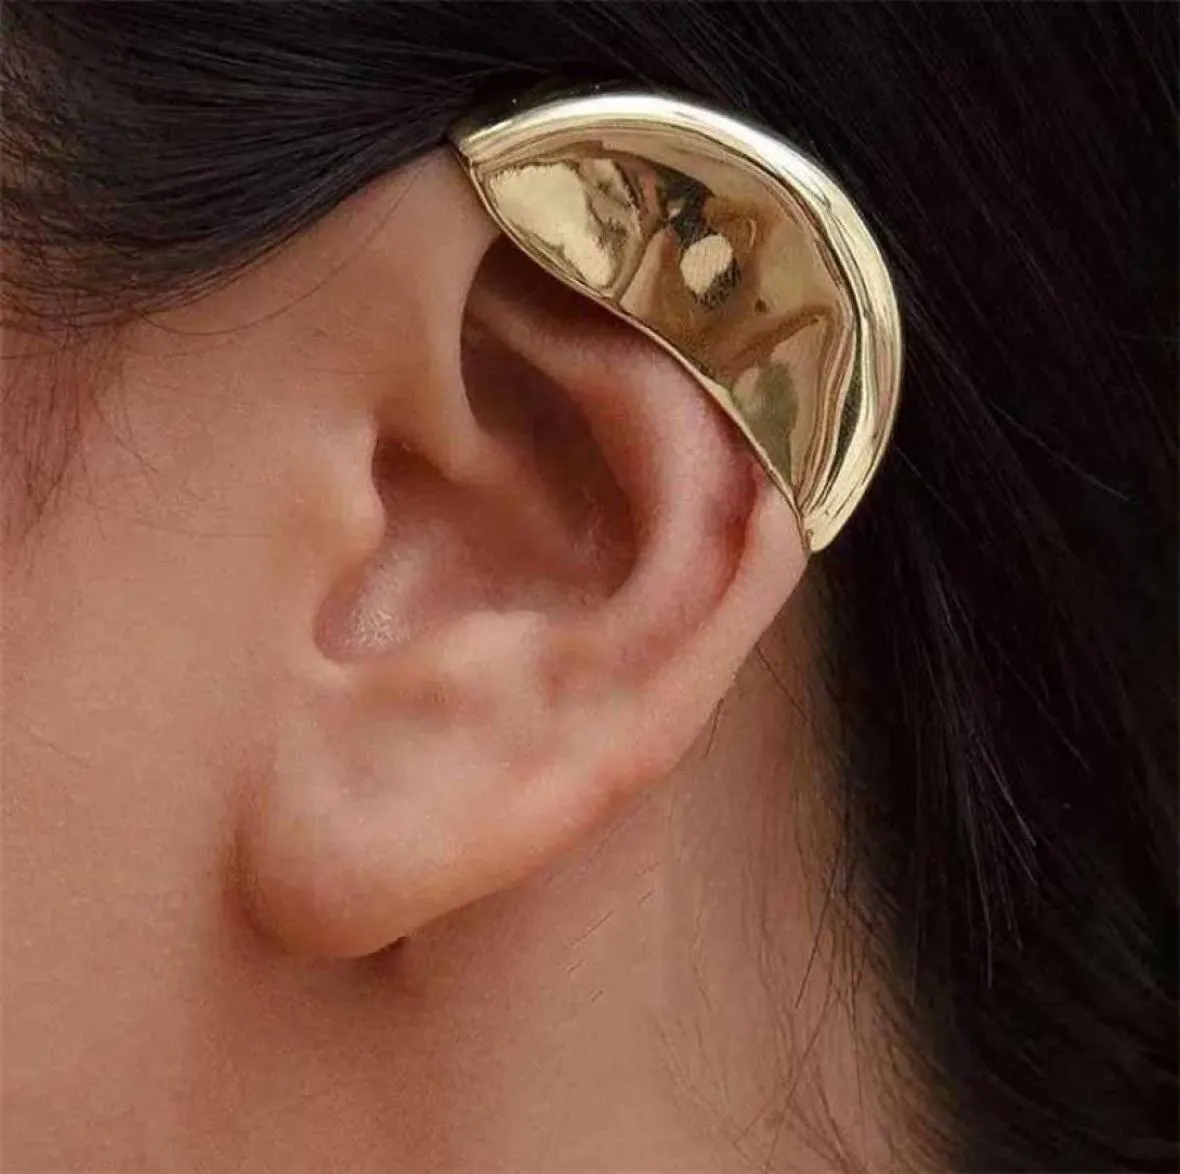 Punk Auricle helix Ear Cuff Clip On Earrings Without Piercing men Women Gold earring clip unique unusual cool jewelry hiphop 21123556676